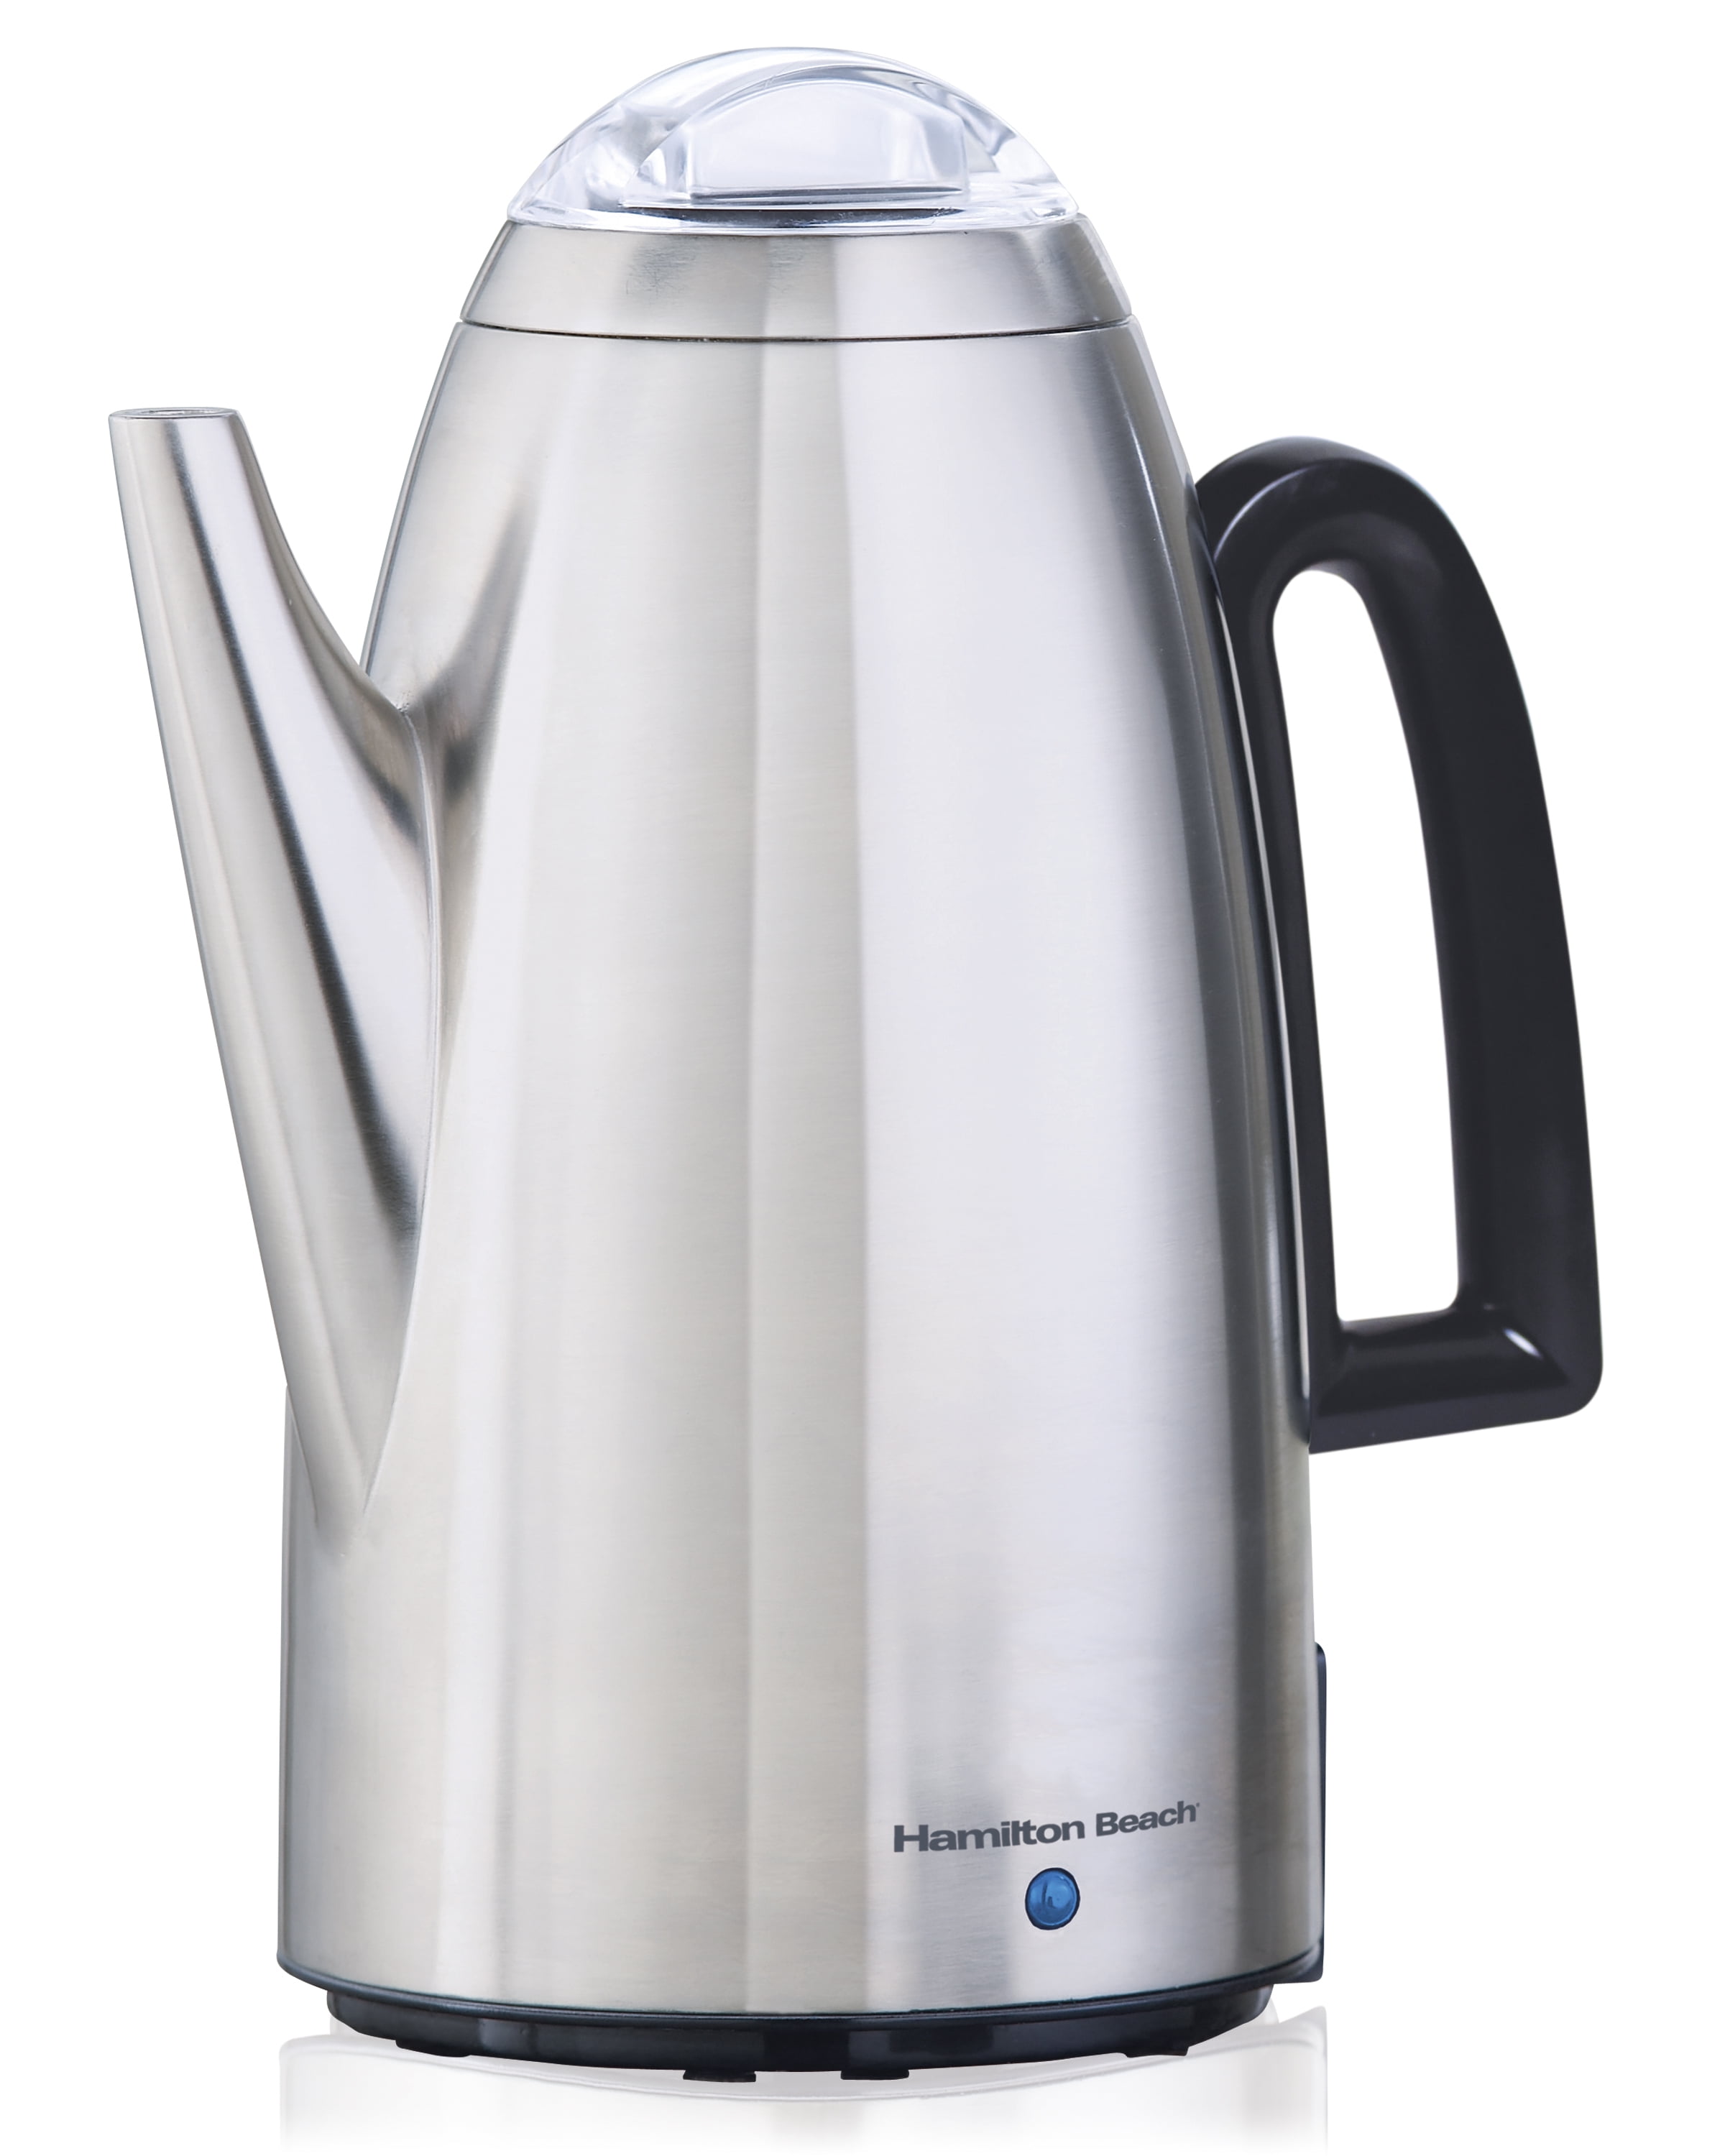 Hamilton Beach Proctor Silex 12 Cup Electric Coffee Percolator Model 40616  Stainless Steel Tested Working Complete 